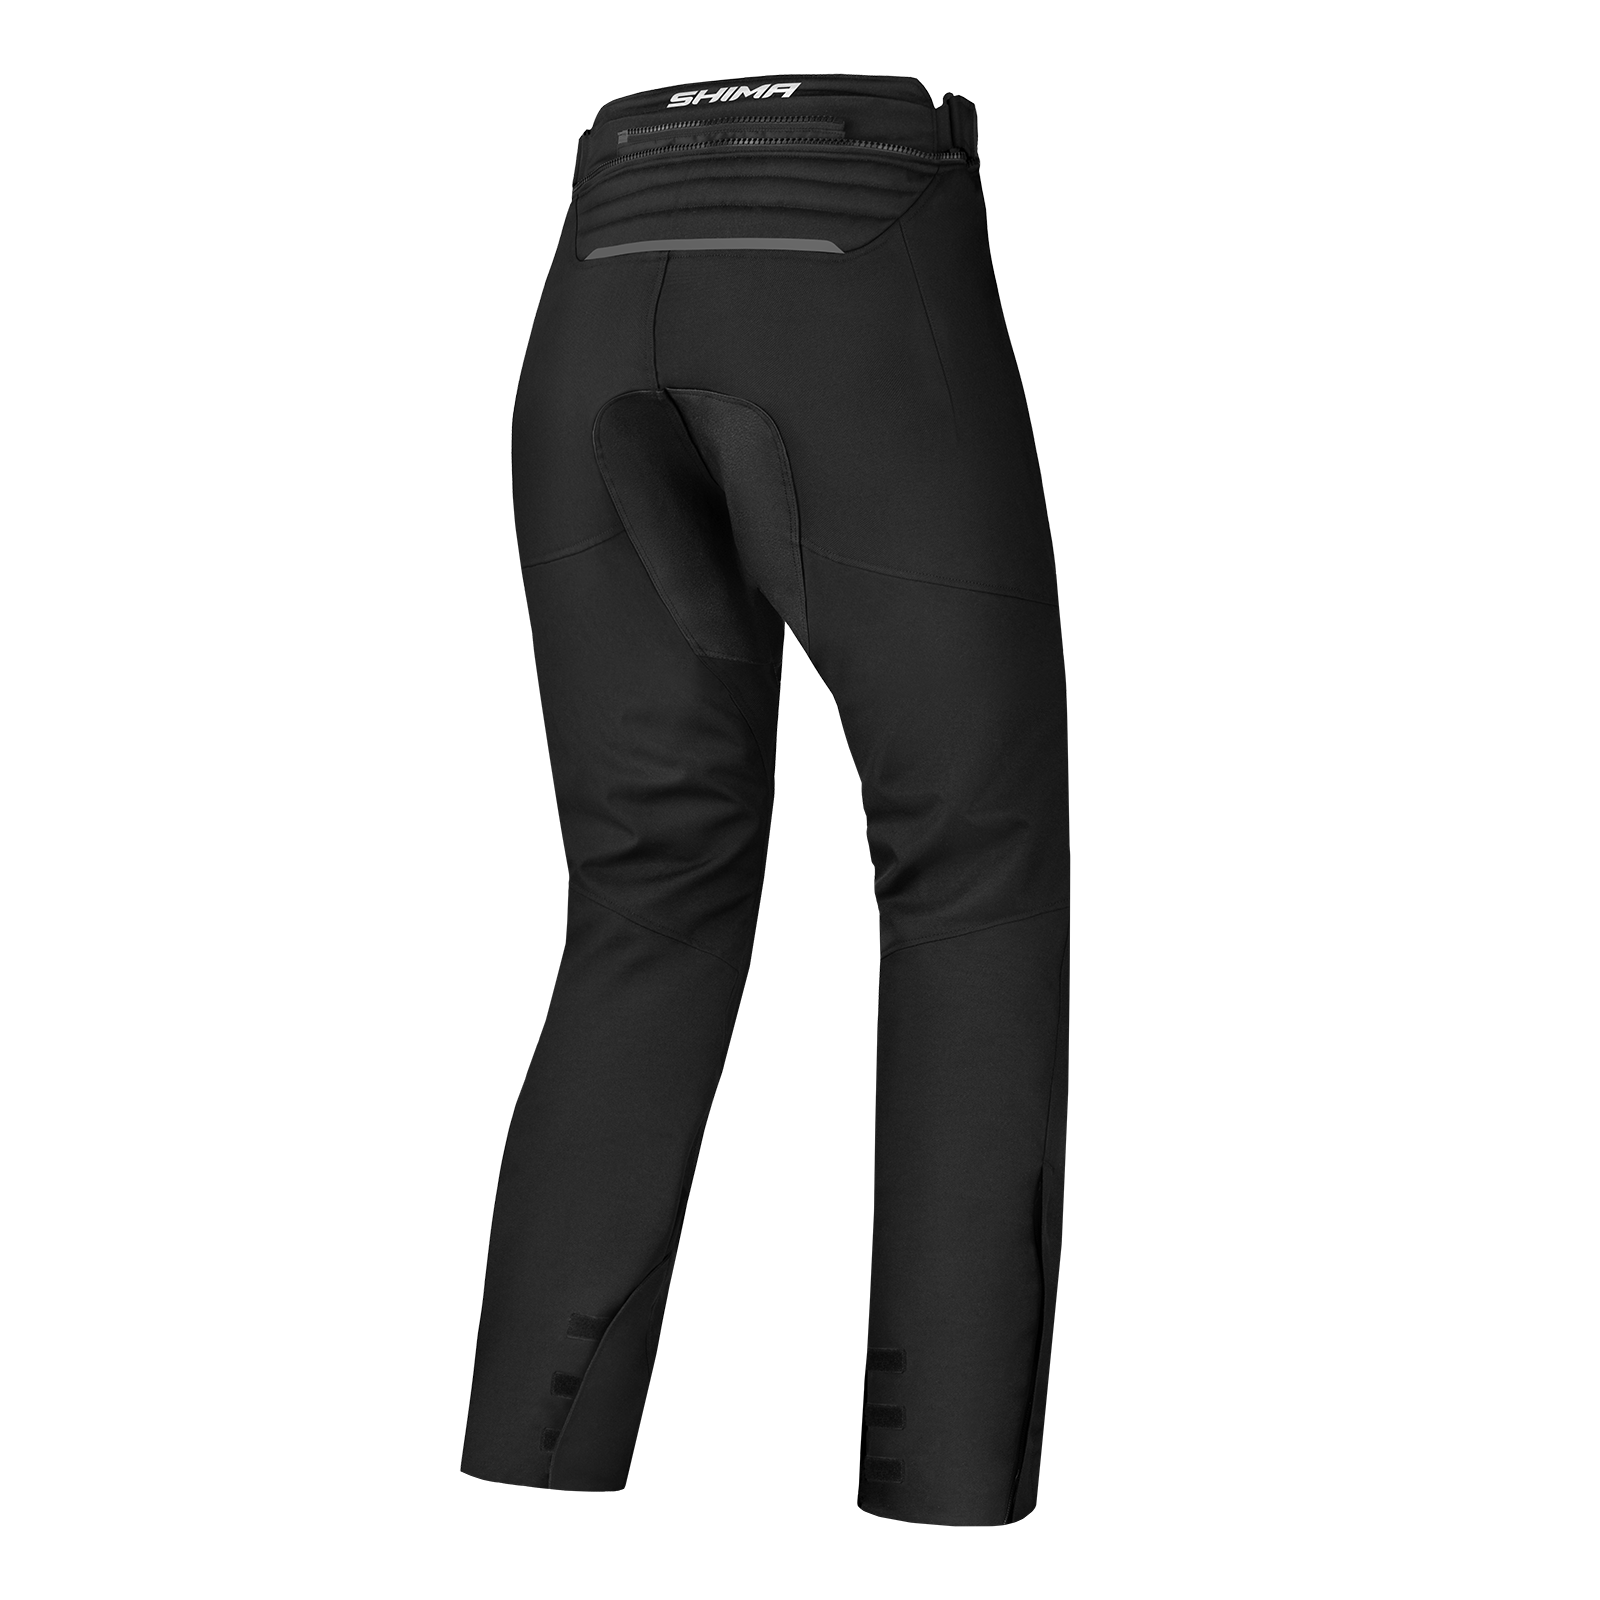 The back of Black women textile motorcycle trousers from Shima